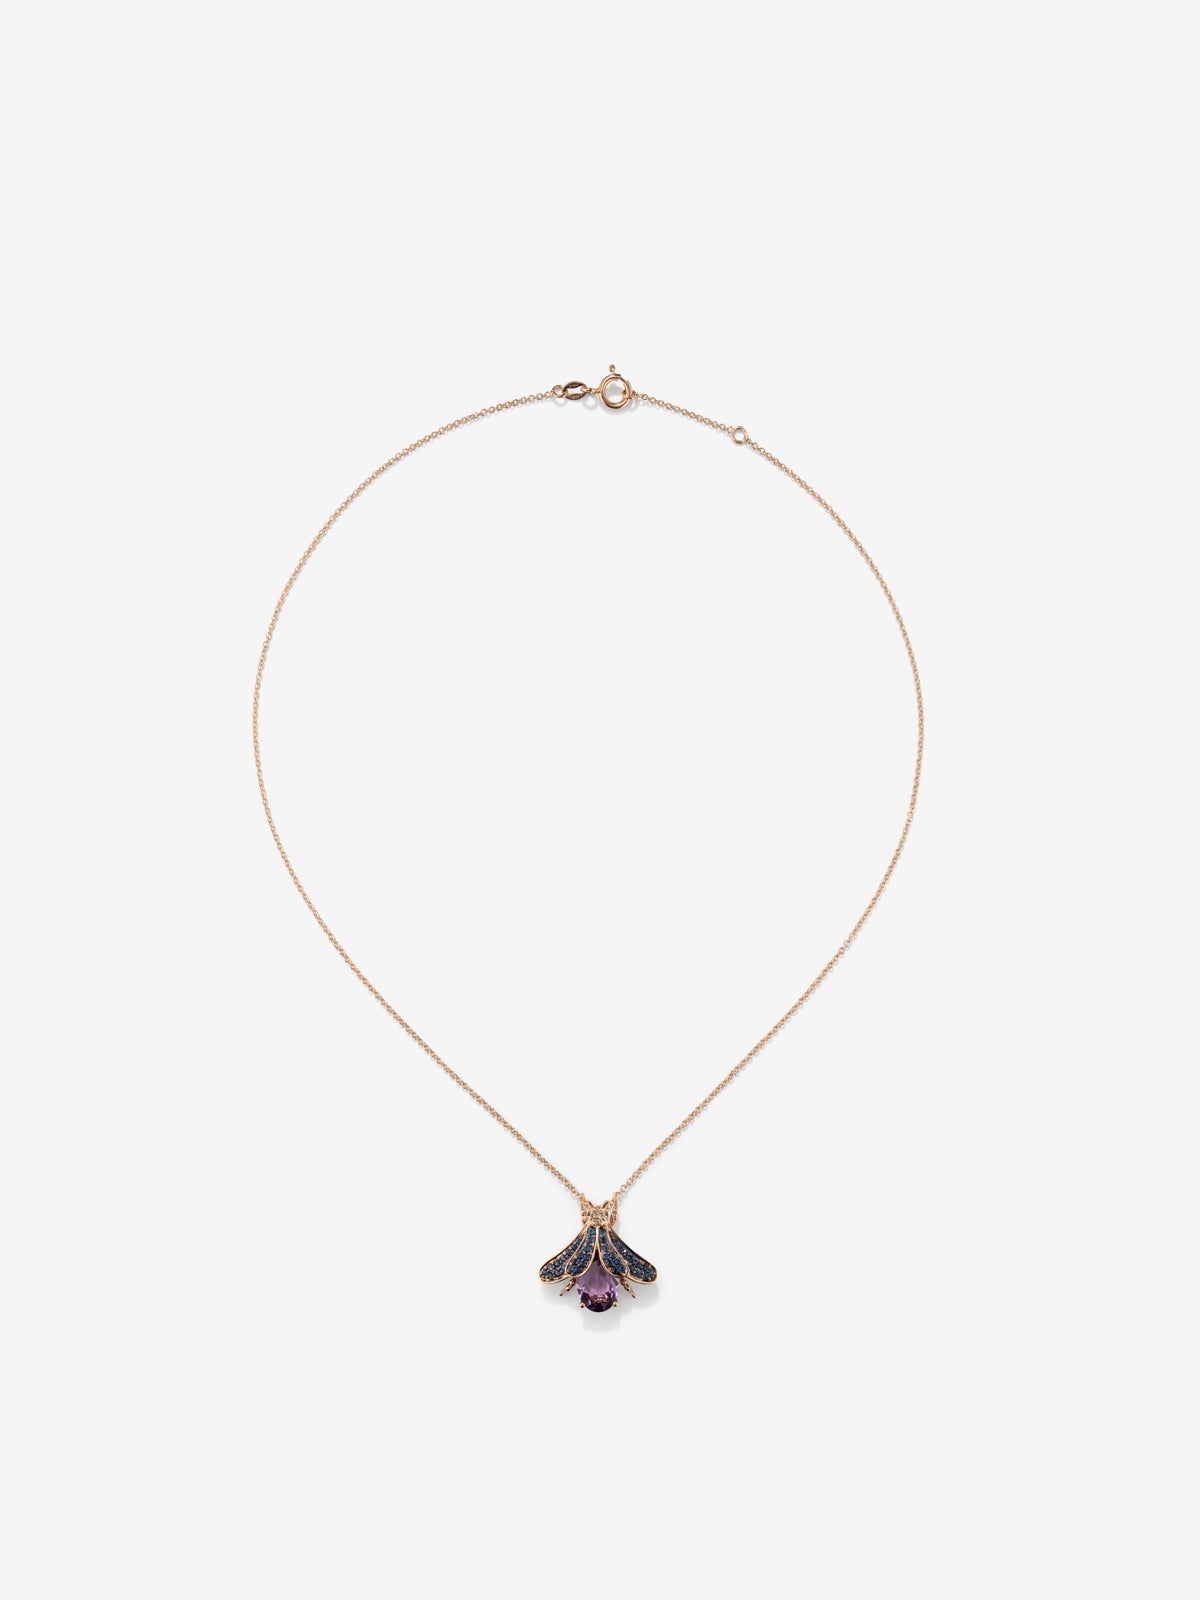 18K Rose Gold Insect Pendant Chain with Amethyst and Sapphire